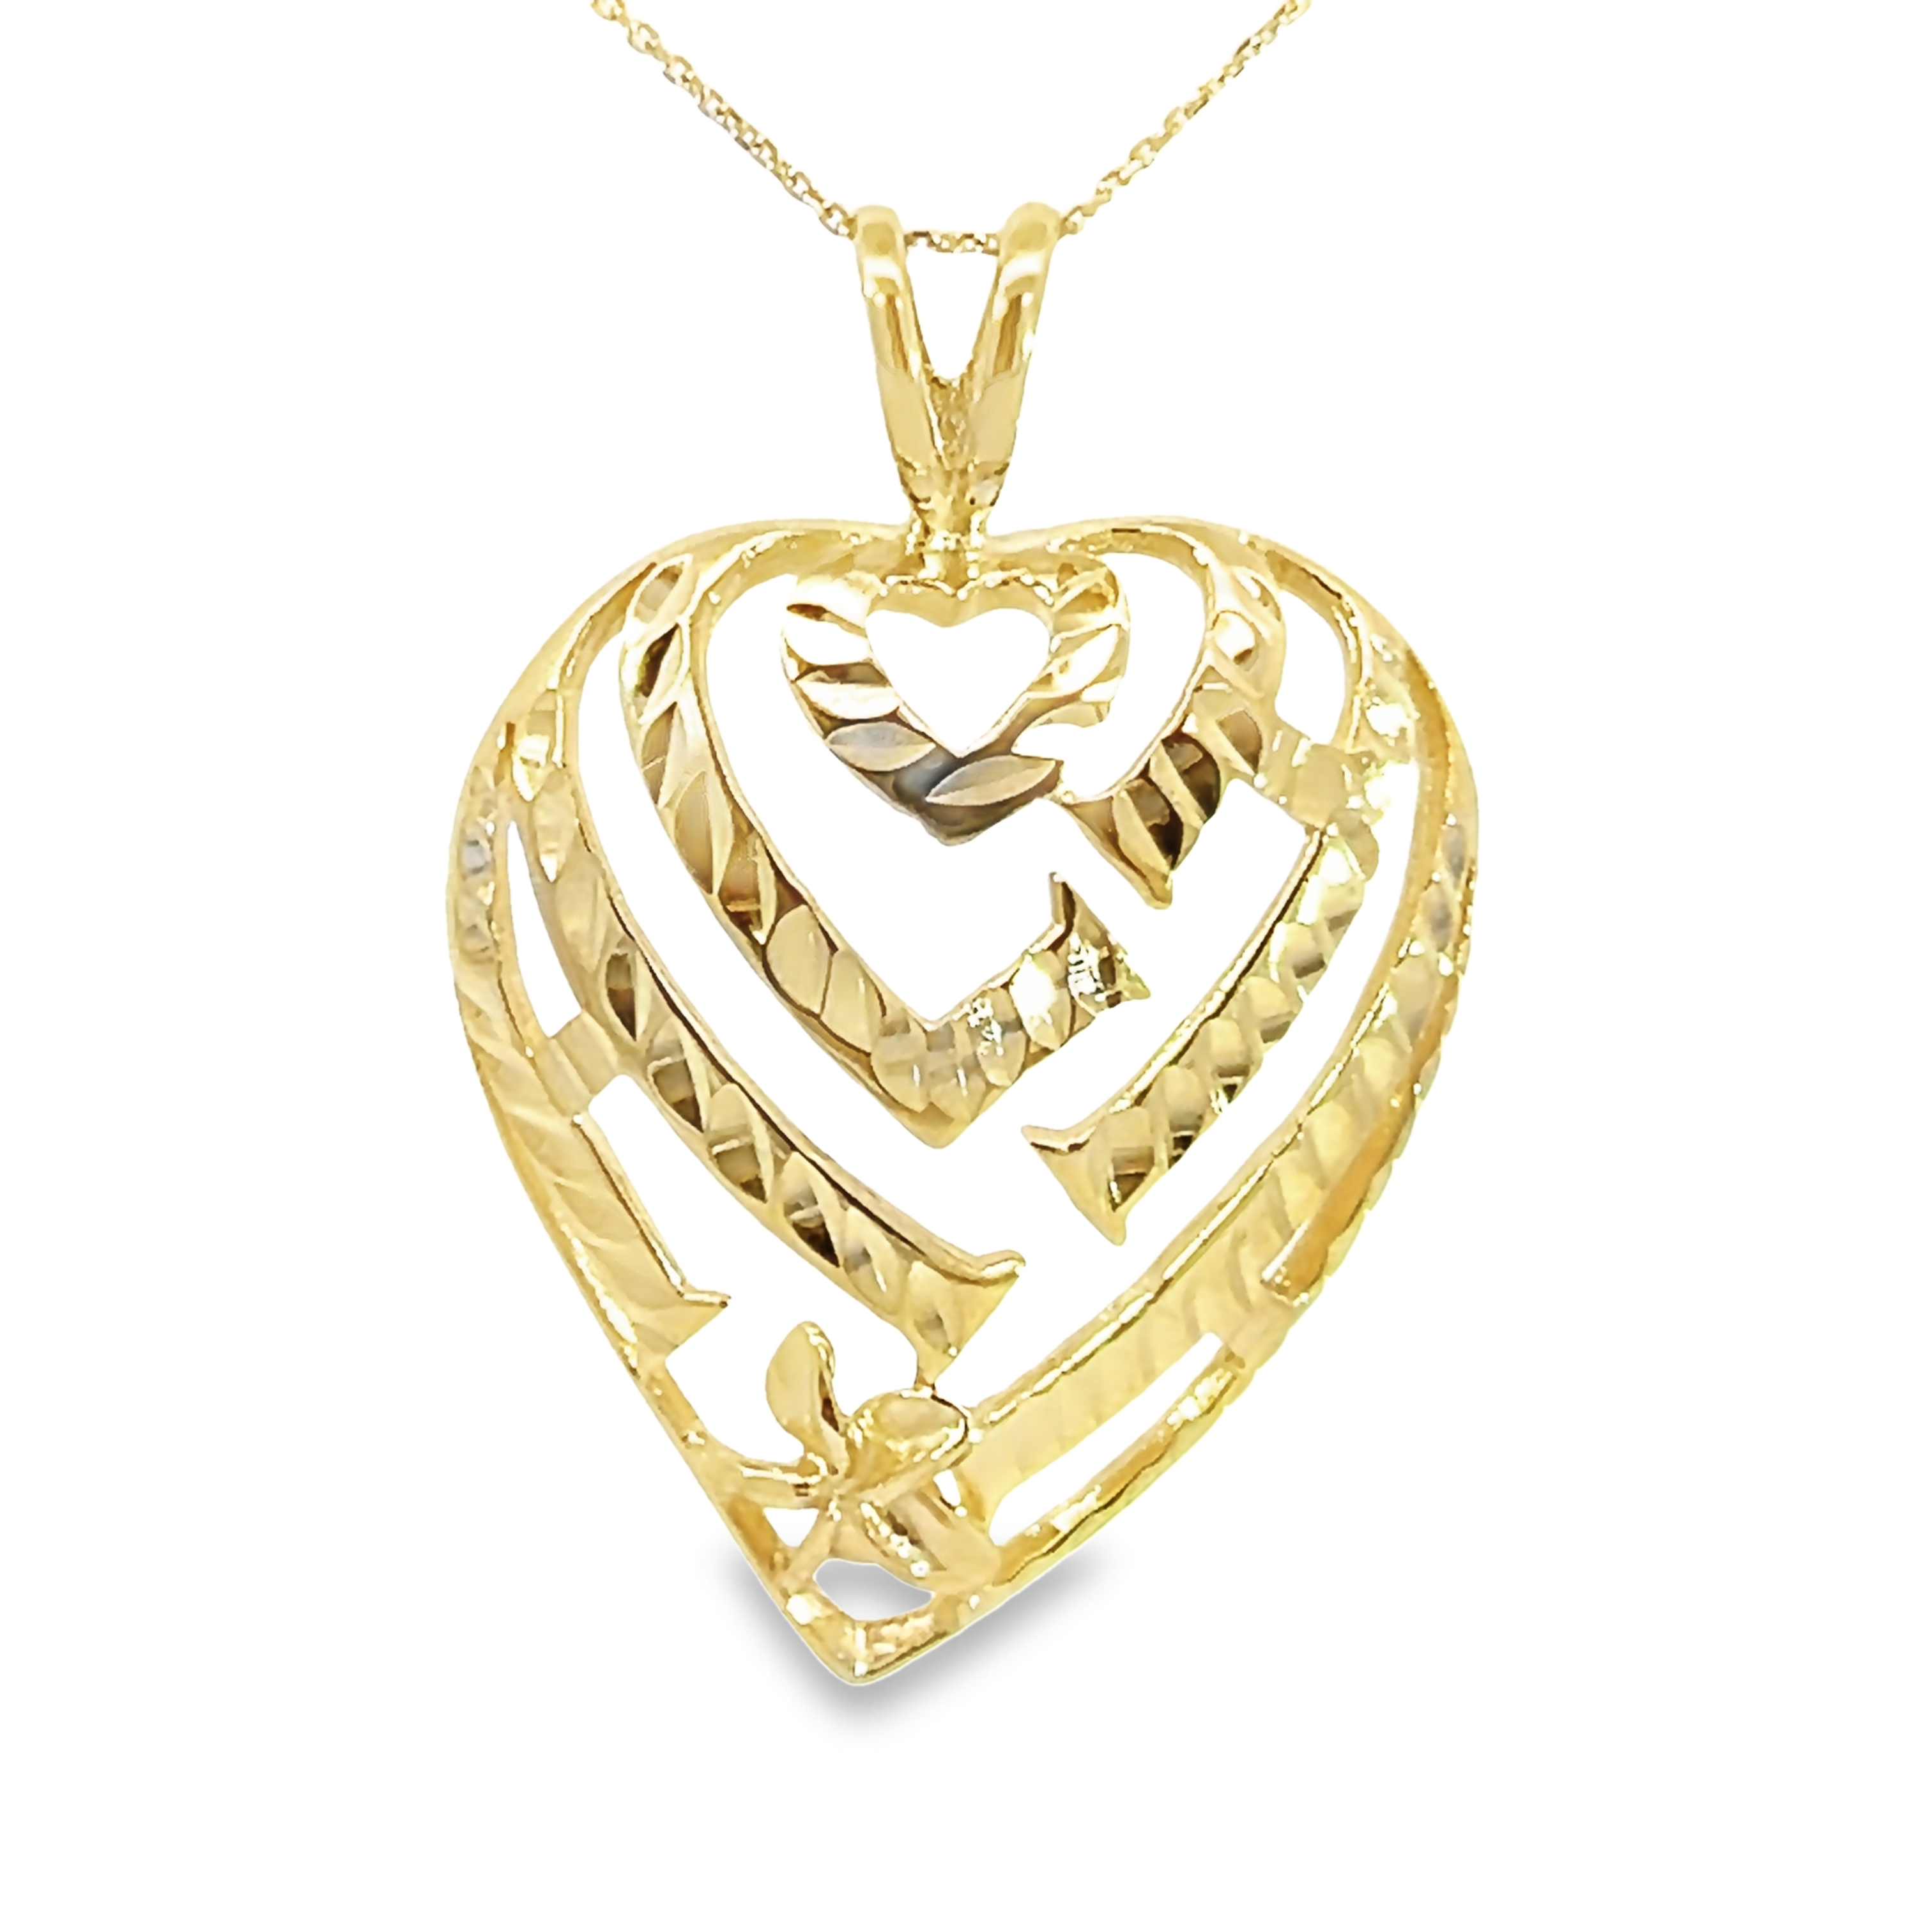 14k Yellow Gold Cut Out Puffed Heart Pendant Necklace